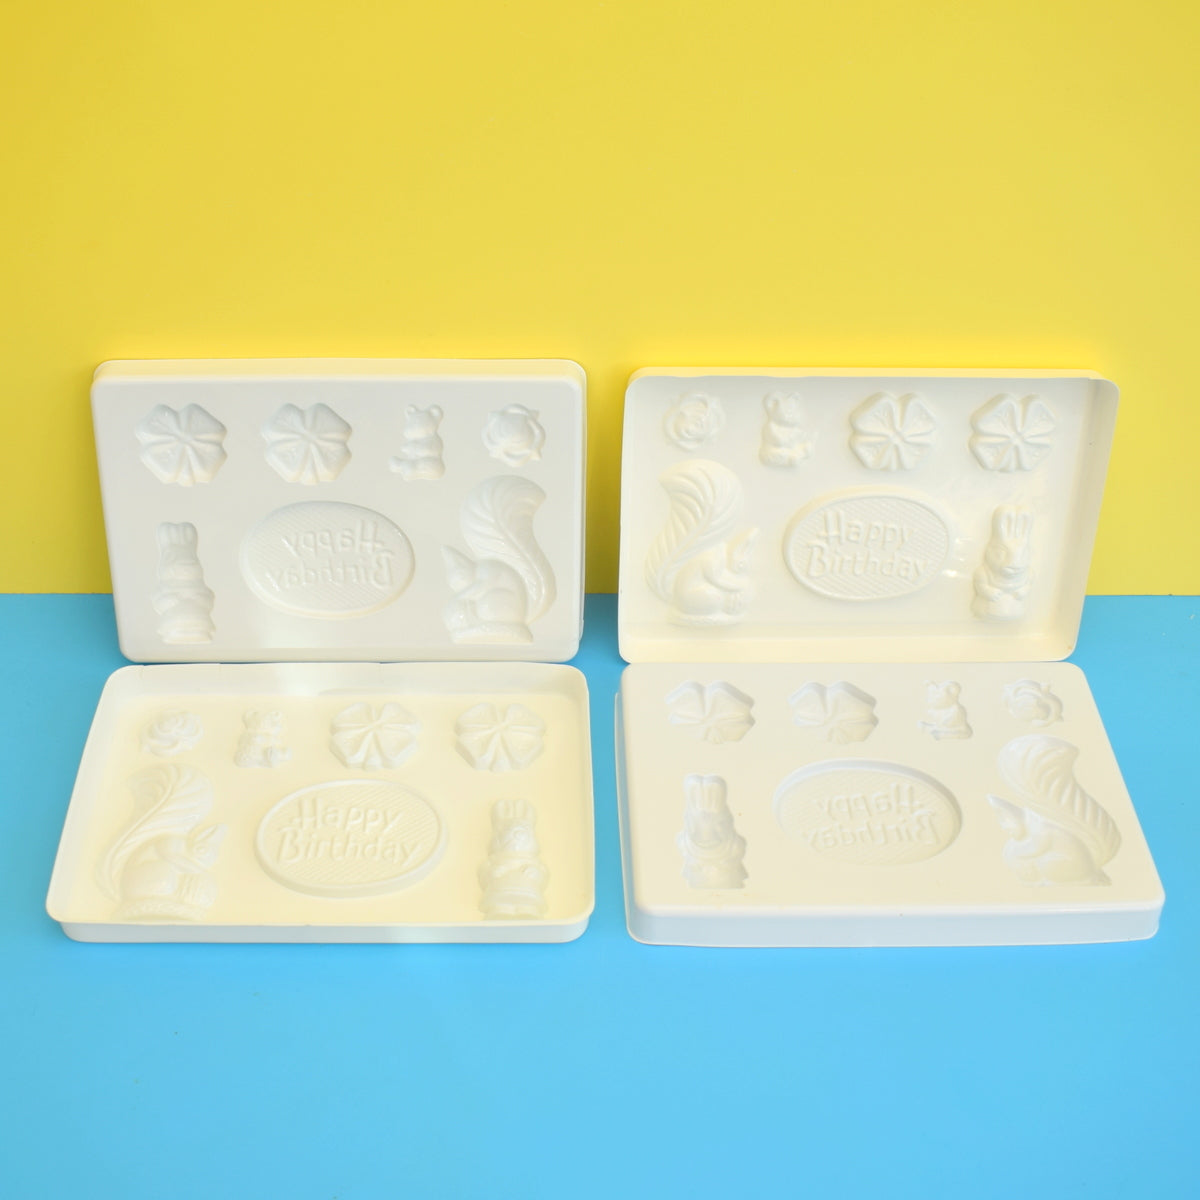 Vintage Plastic Chocolate Moulds Easter Eggs / Present / Gift Ideas